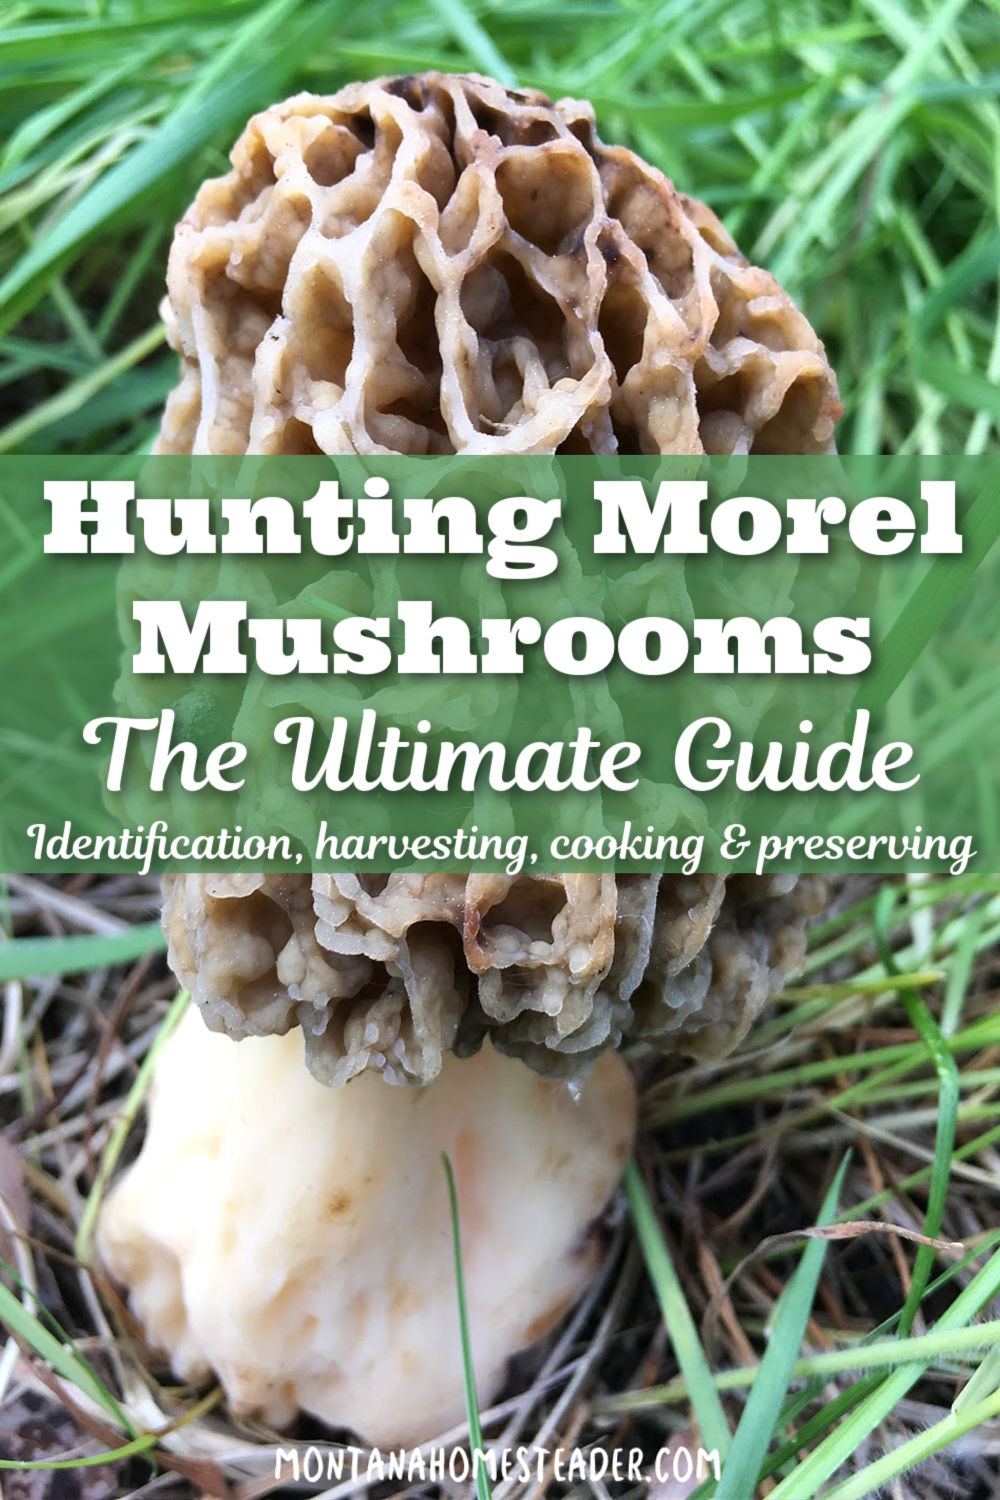 Why Mushroom Grows in My Plant: The Ultimate Guide.